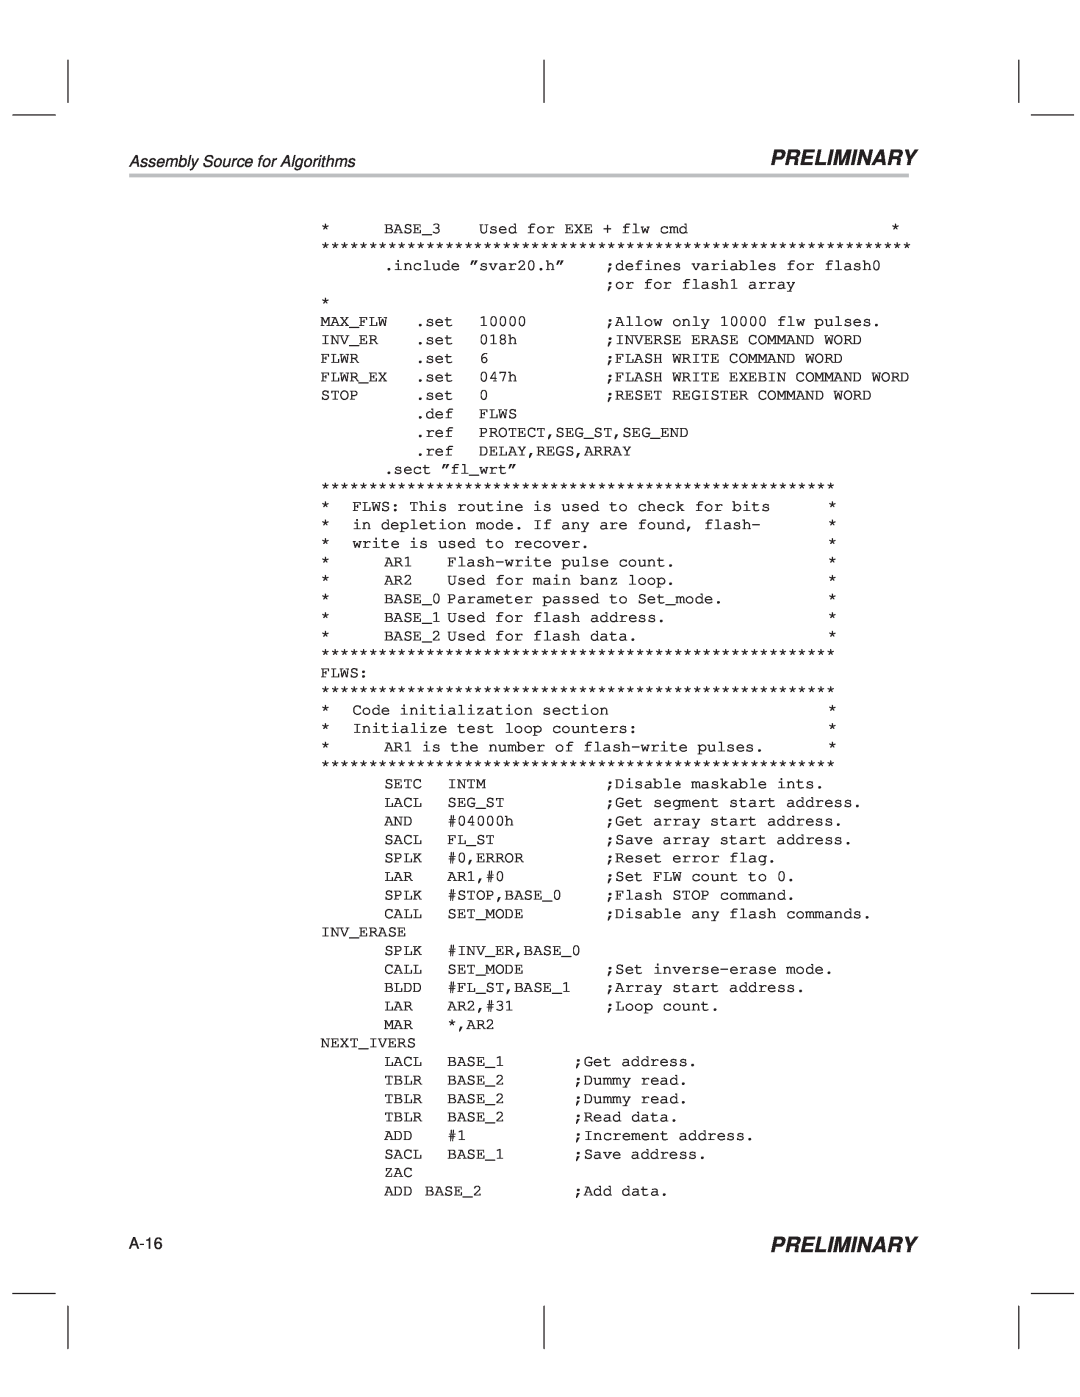 Texas Instruments TMS320F20x/F24x DSP manual Preliminary, Assembly Source for Algorithms, A-16 